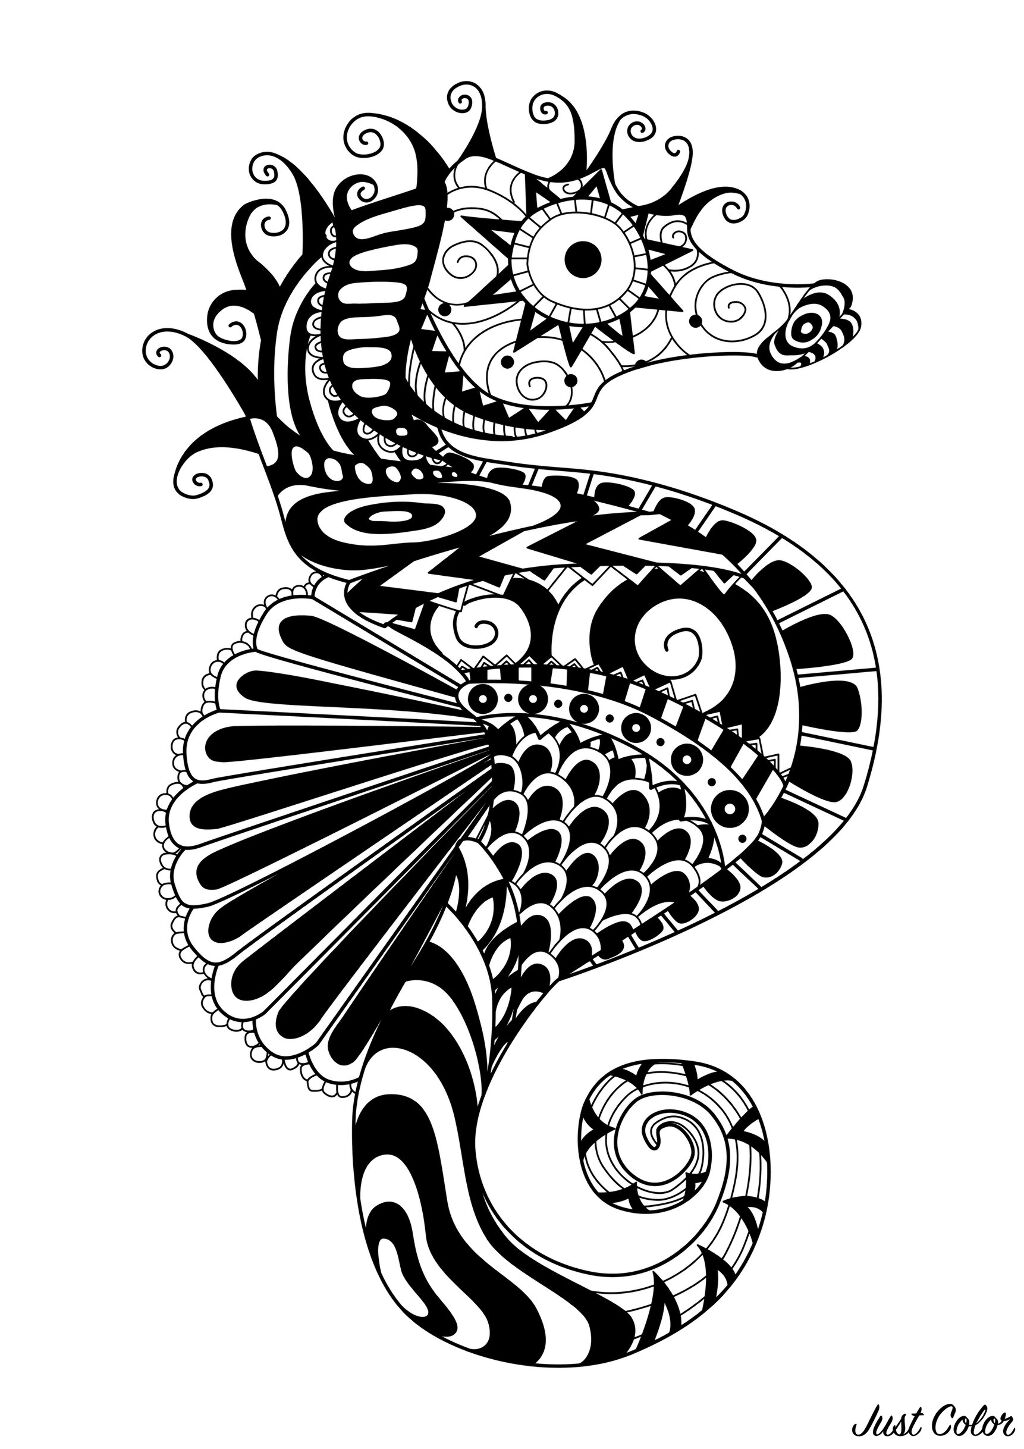 A sea horse with simple Zentangle style